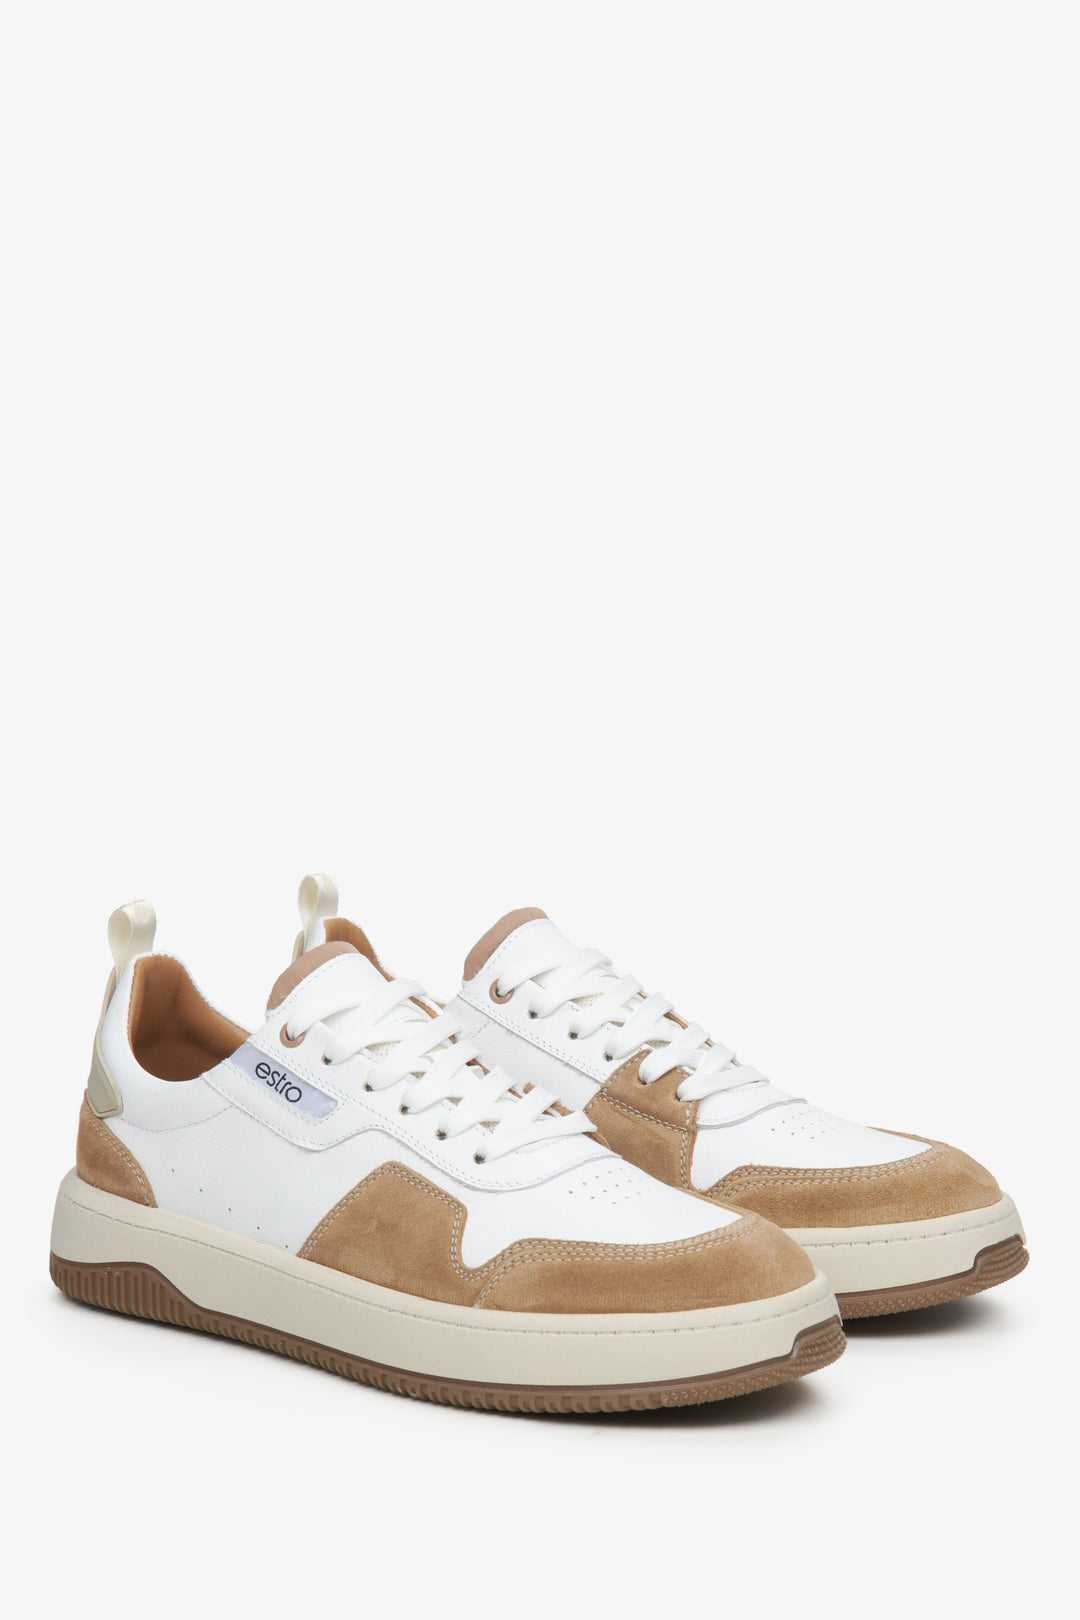 Estro men's sneakers with a flexible sole in white-brown color - close-up on the heel counter and side line of the shoes.